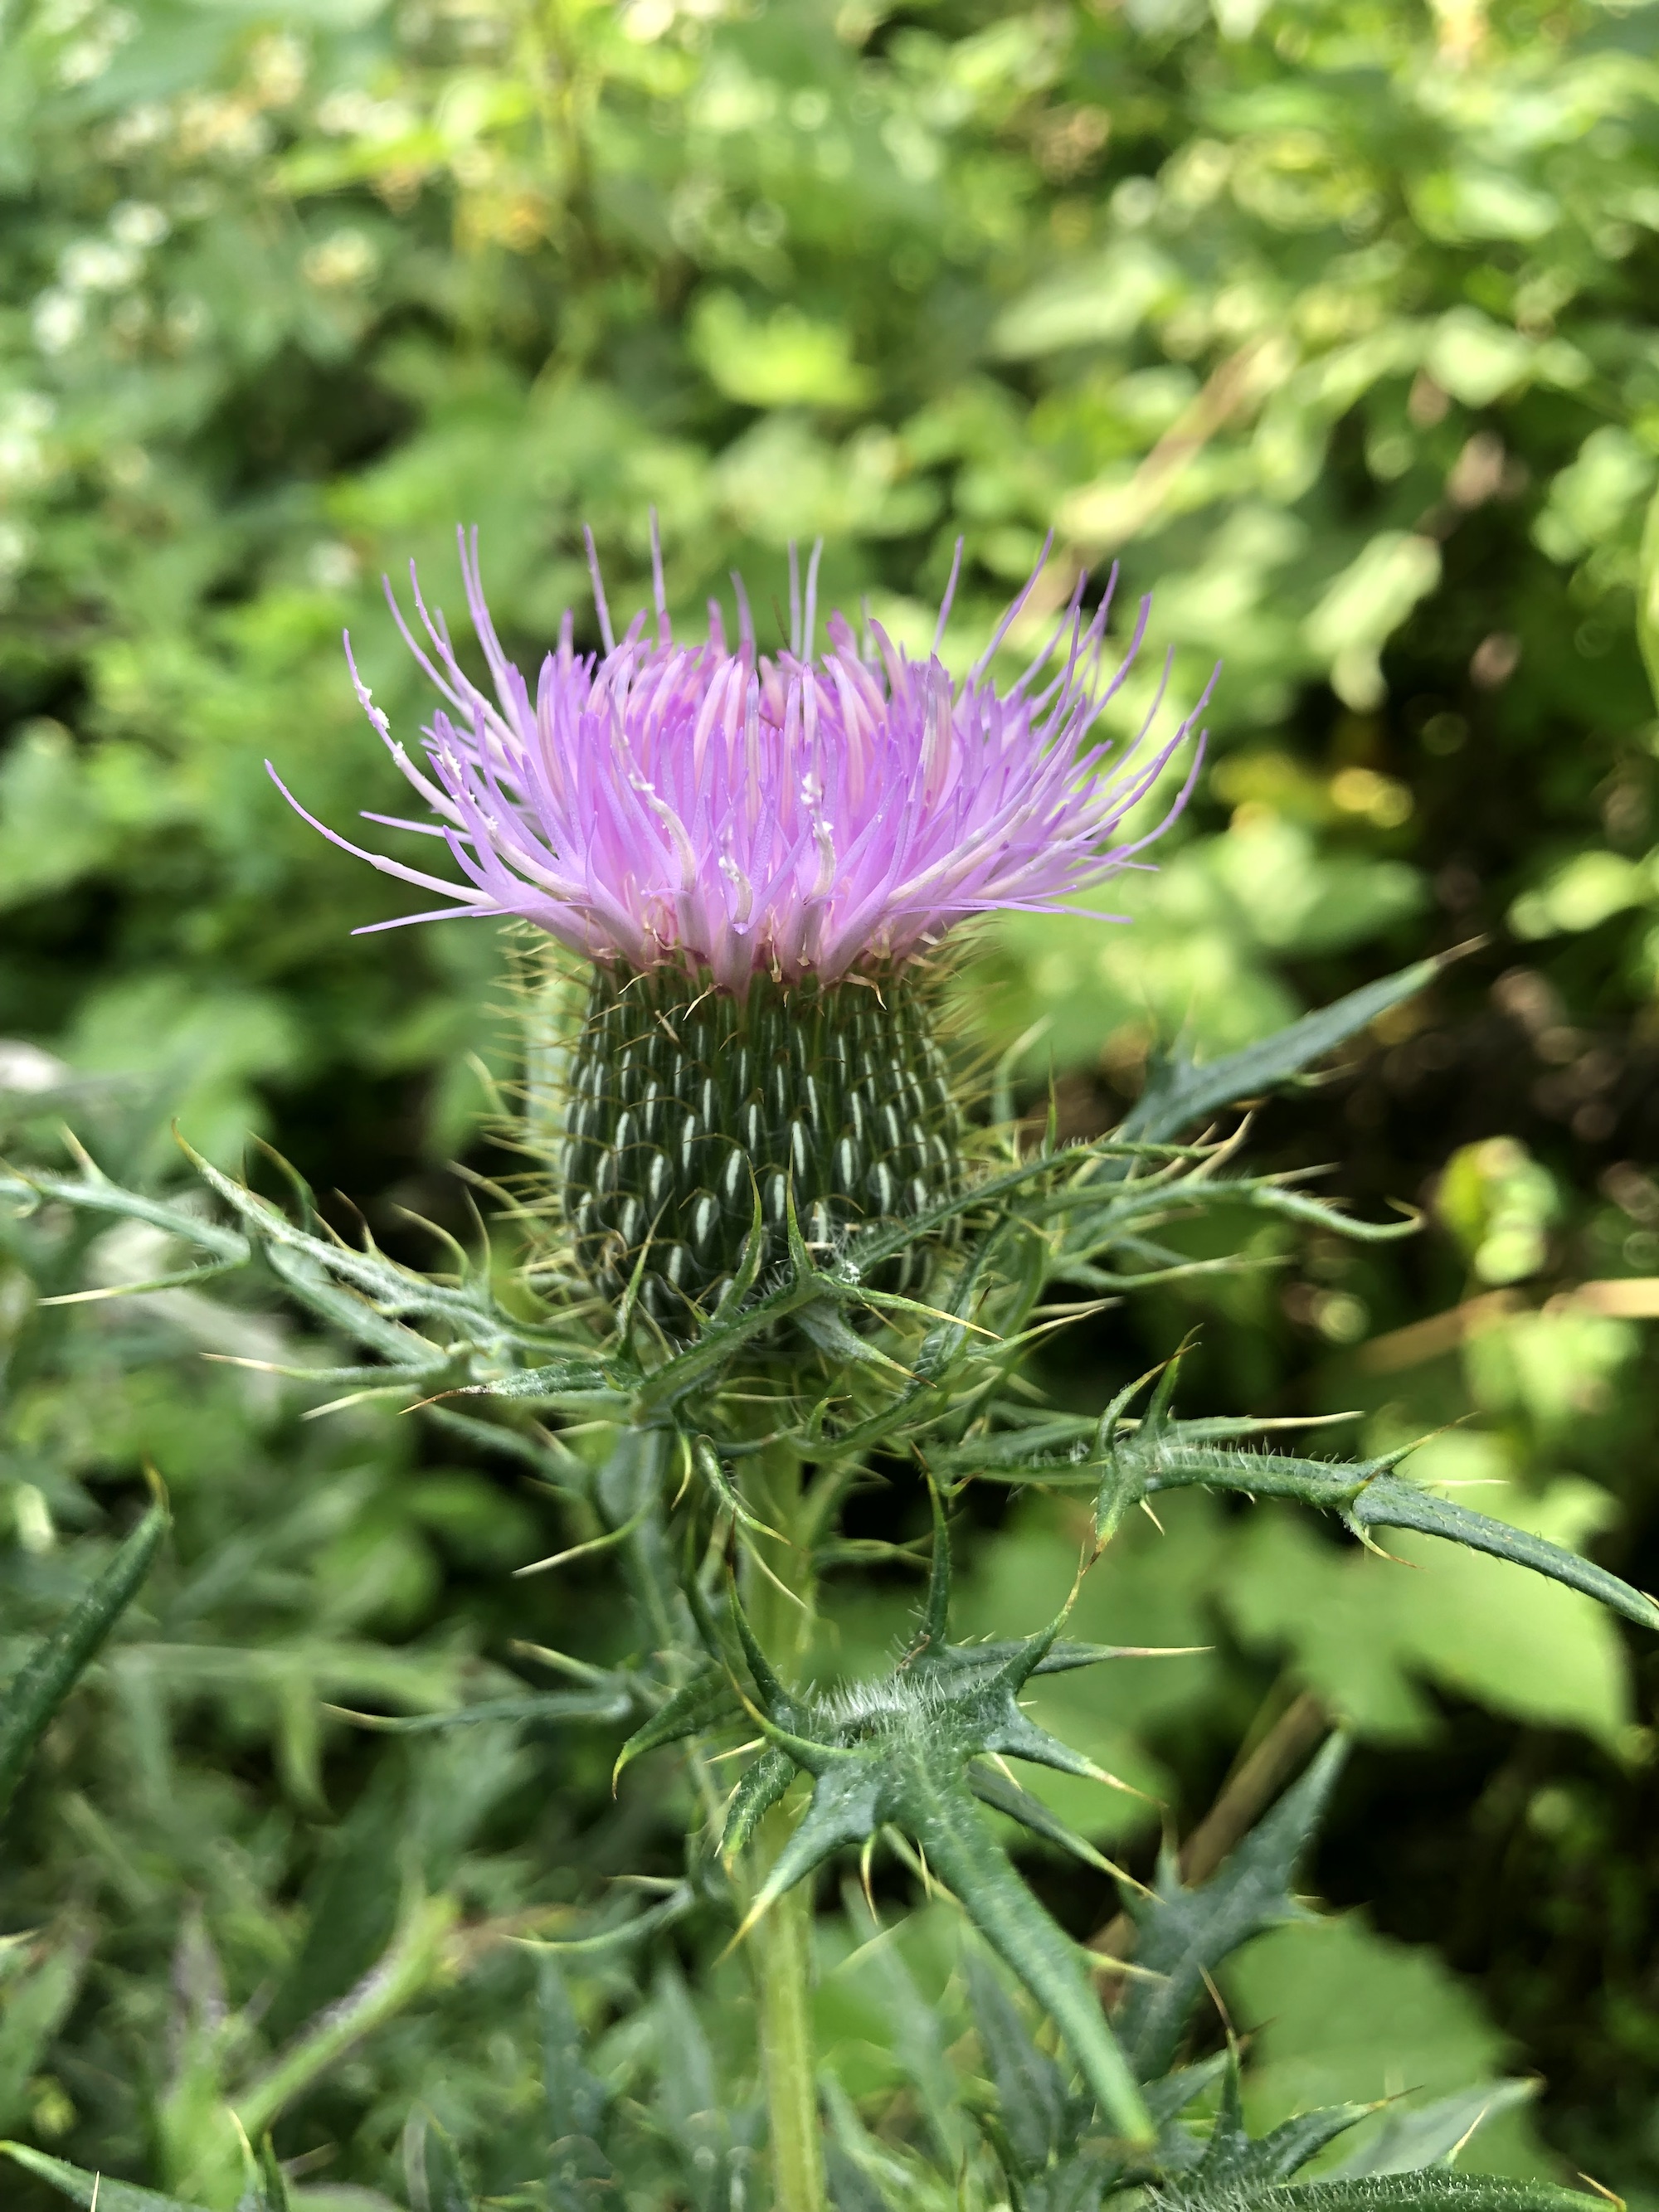 Field Thistle near Seminole Highway entrance to the UW Arboretum in Madison, Wisconsin on August 15, 2022.